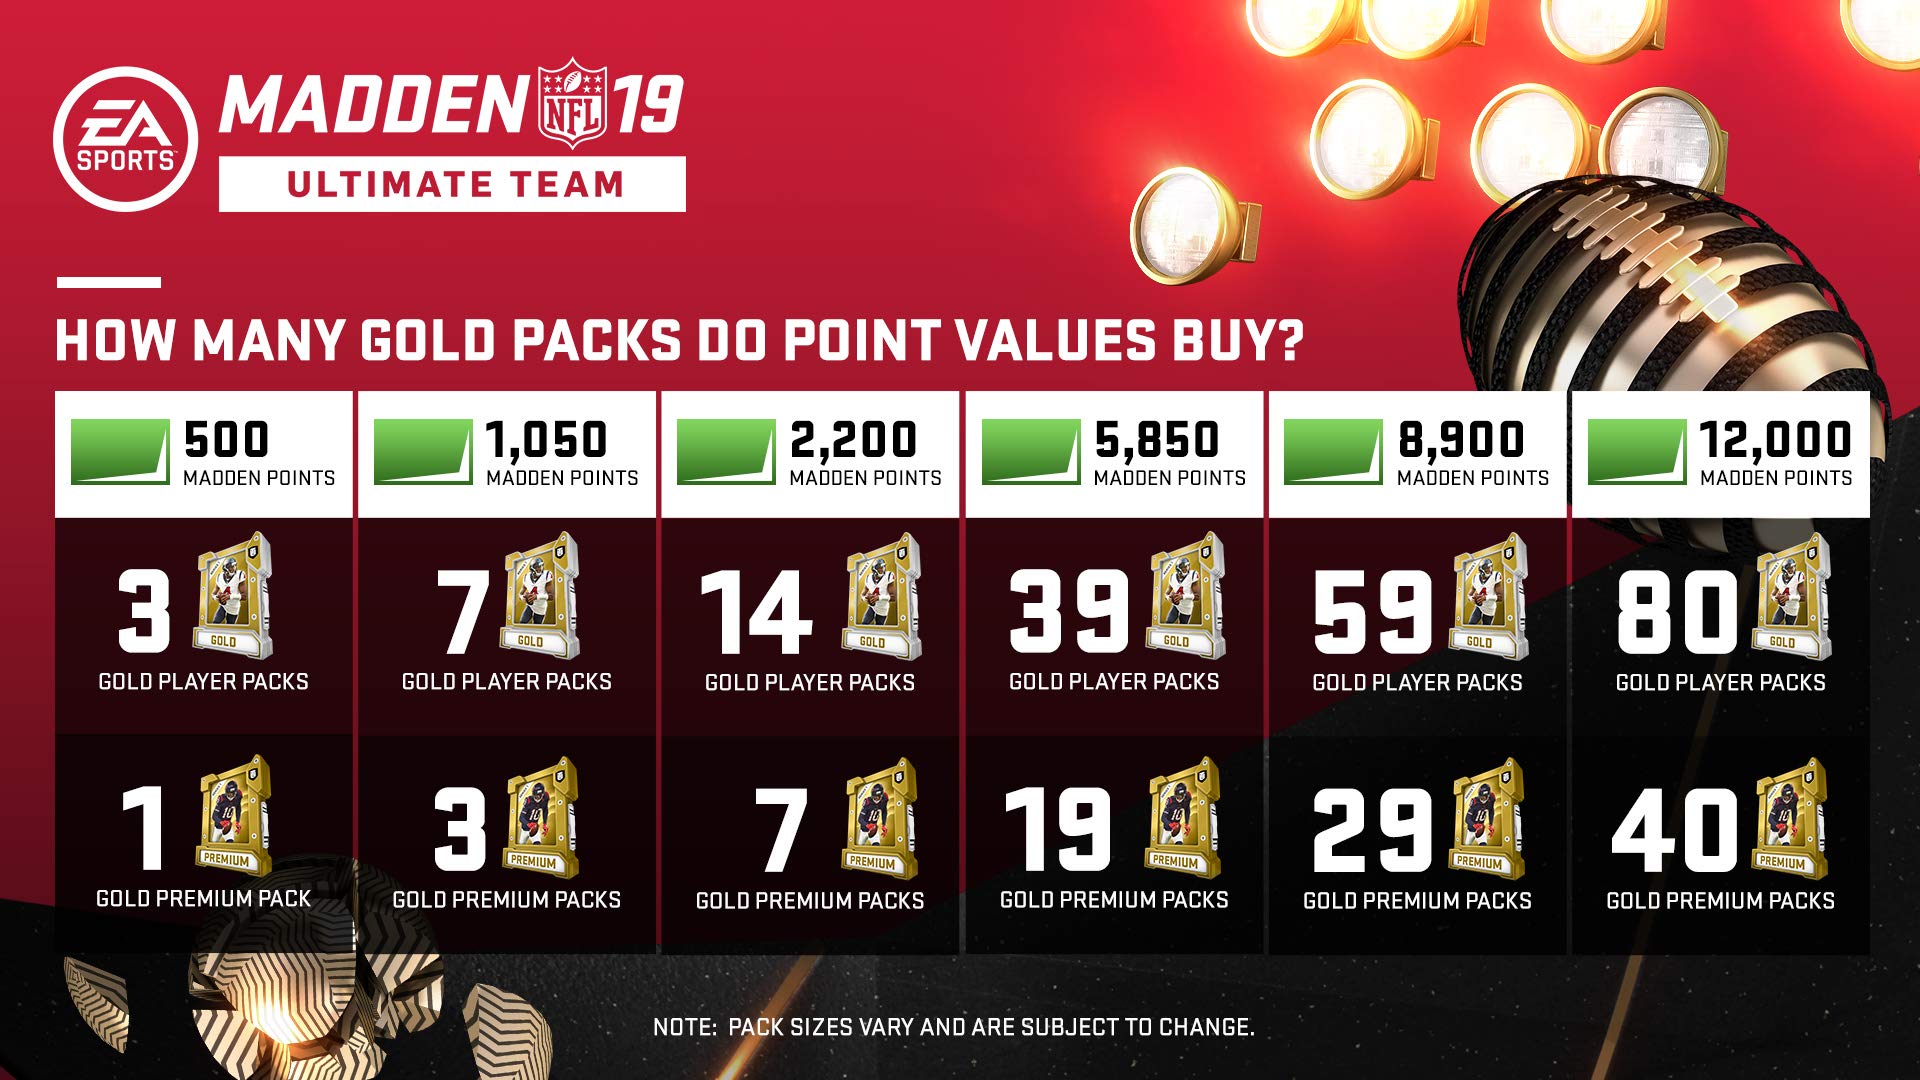 Madden 19 2200 Ultimate Team Points [Online Game Code]